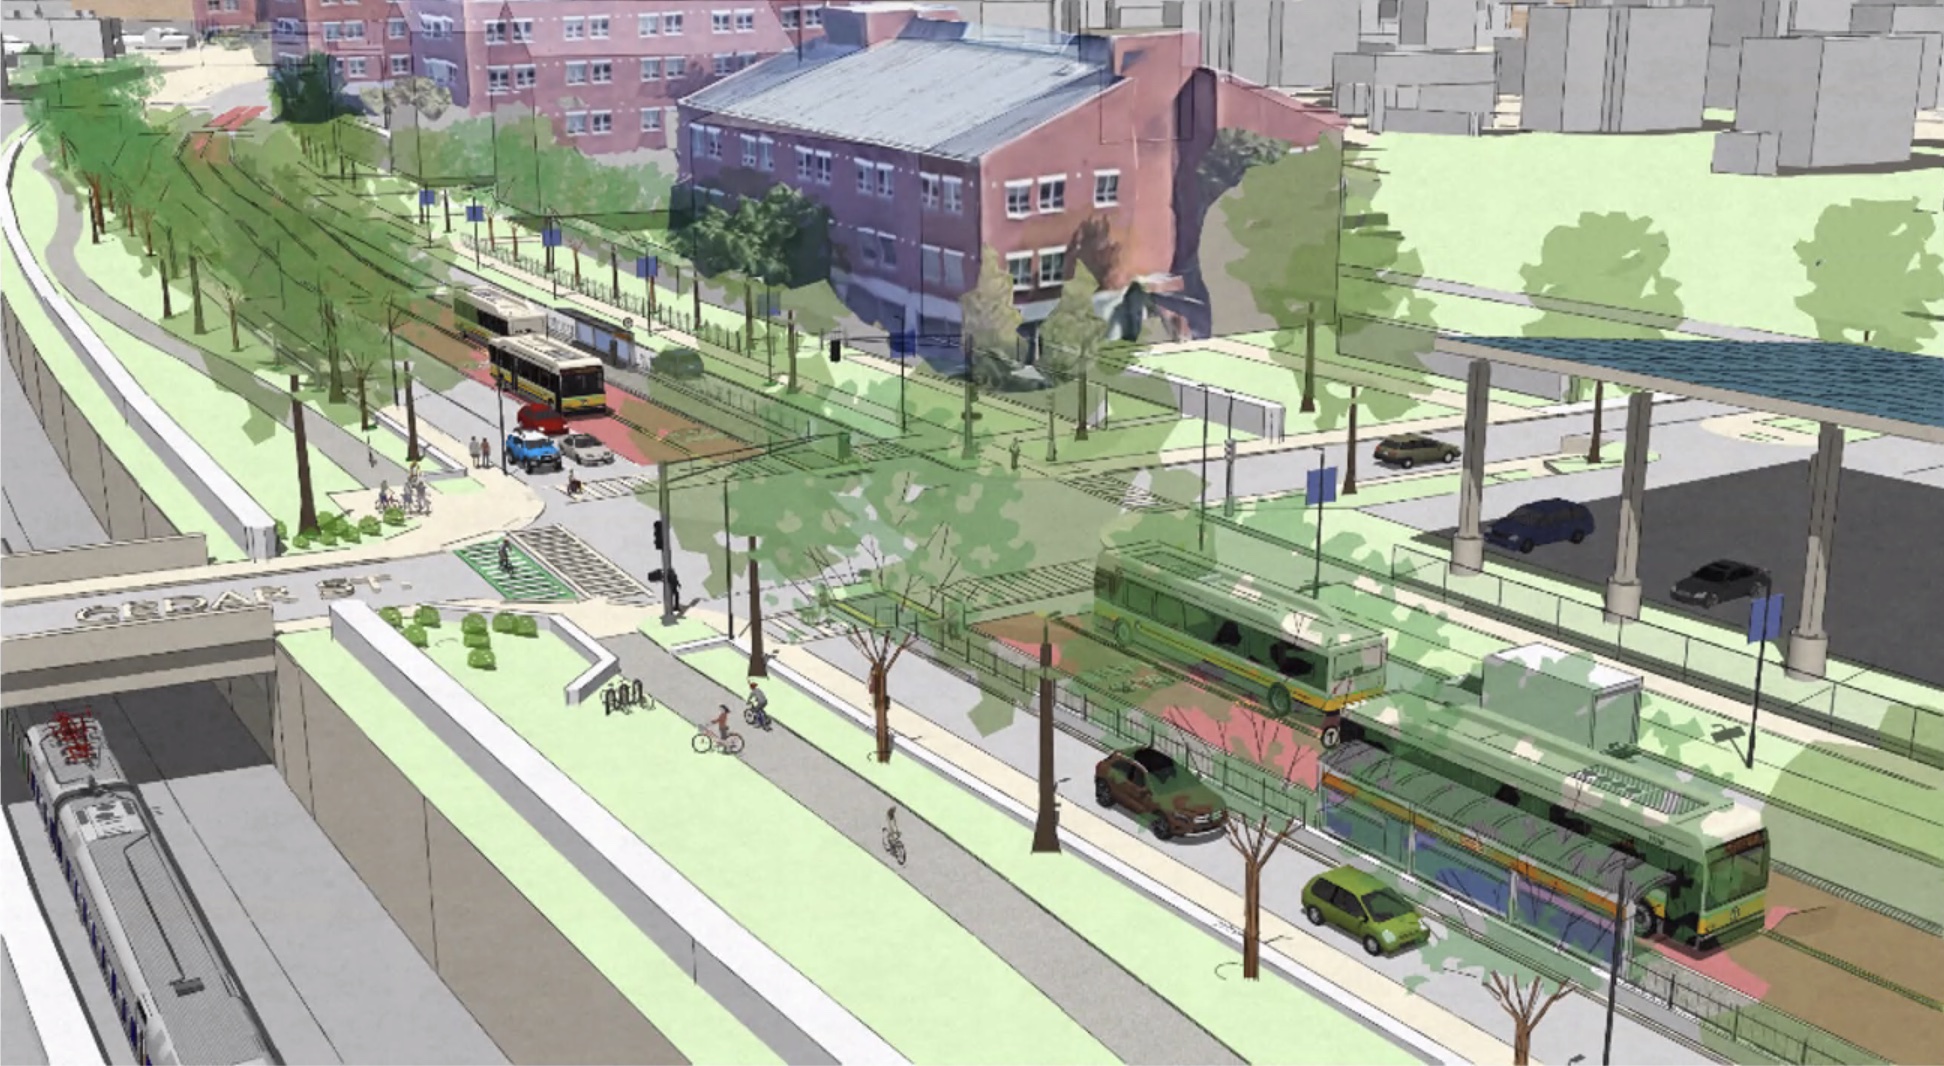 A rendering of a proposed Columbus Avenue busway, looking down at the street from above, with the Northeast Corridor railroad tracks at left, the Southwest Corridor bike and walking paths, and center-running bus lanes on Columbus Avenue, with bus shelters located between the bus lanes and the general-purpose motor vehicle lanes.